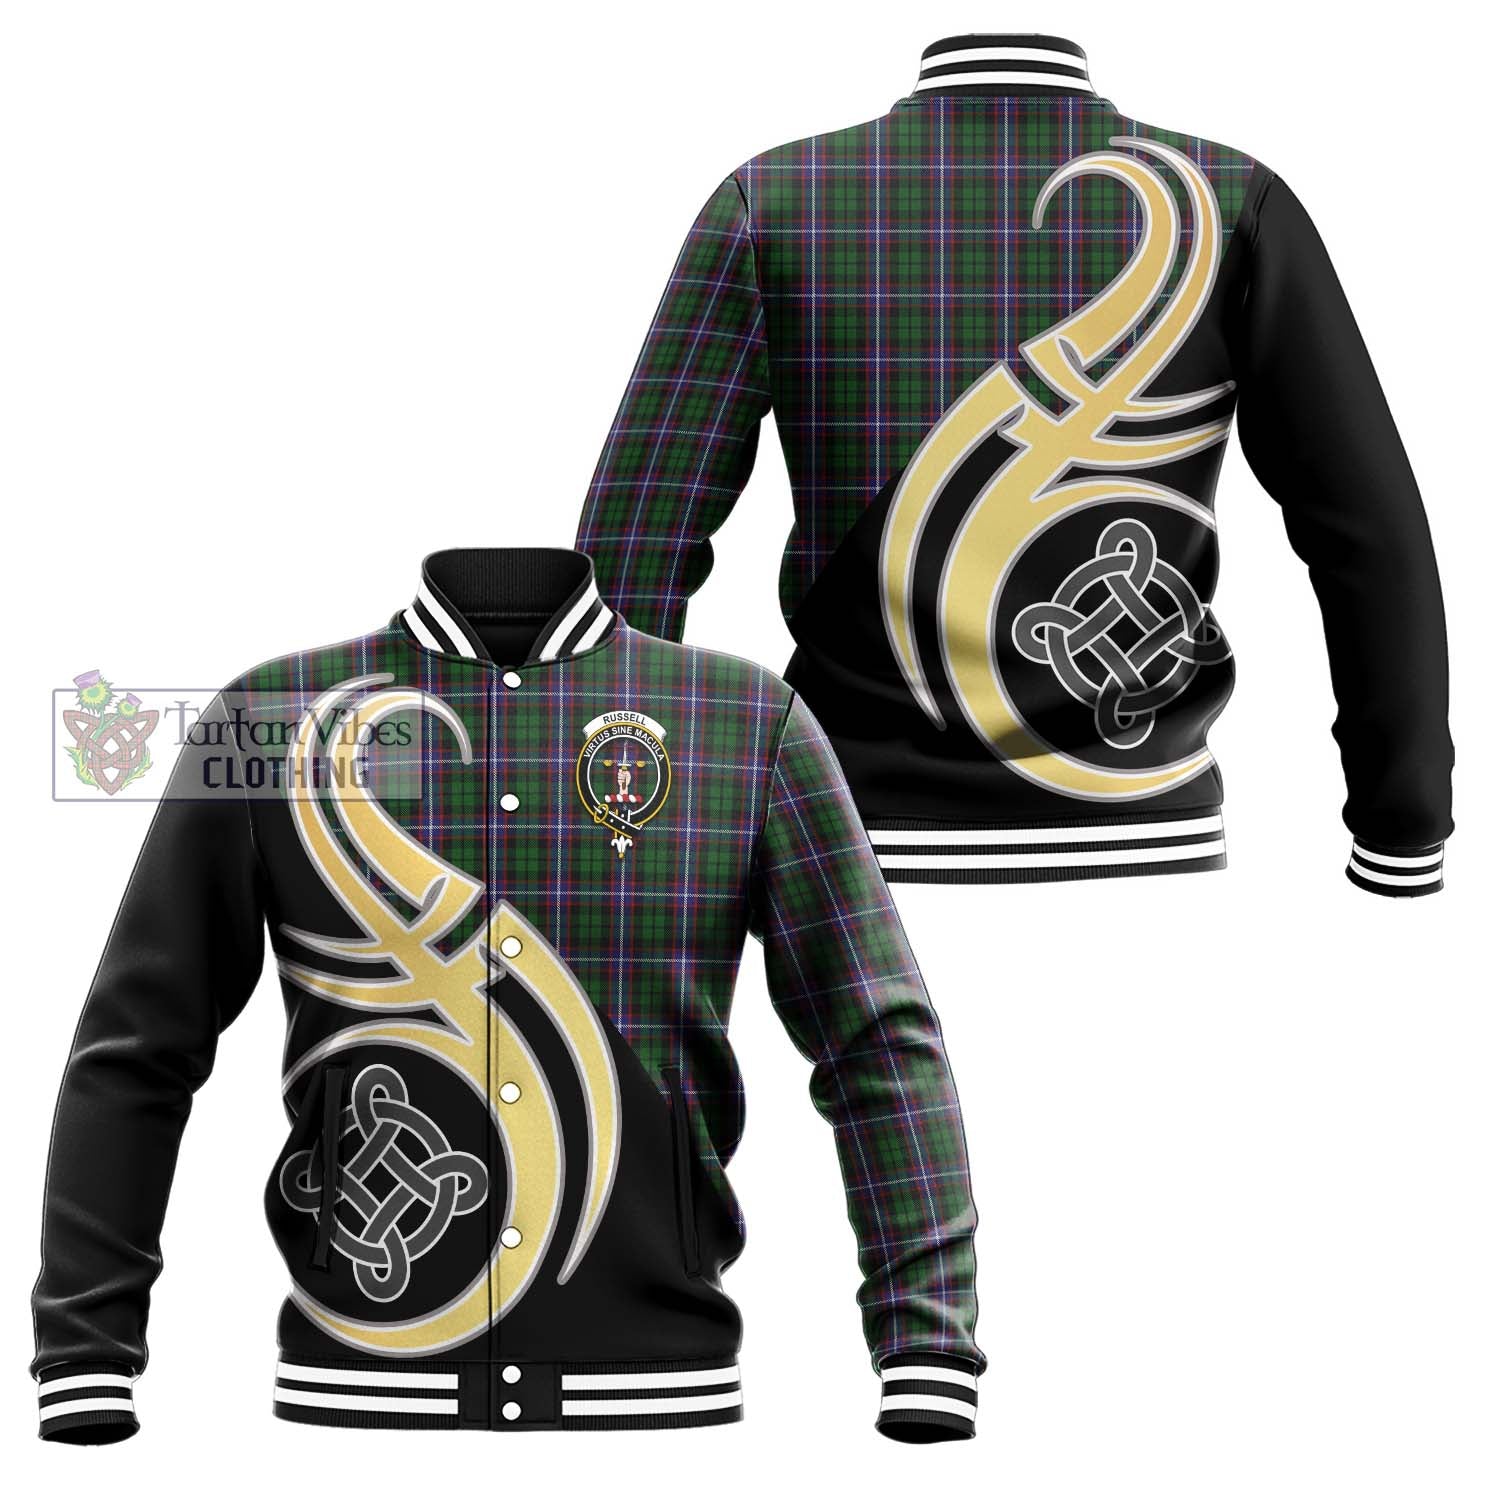 Tartan Vibes Clothing Russell Tartan Baseball Jacket with Family Crest and Celtic Symbol Style